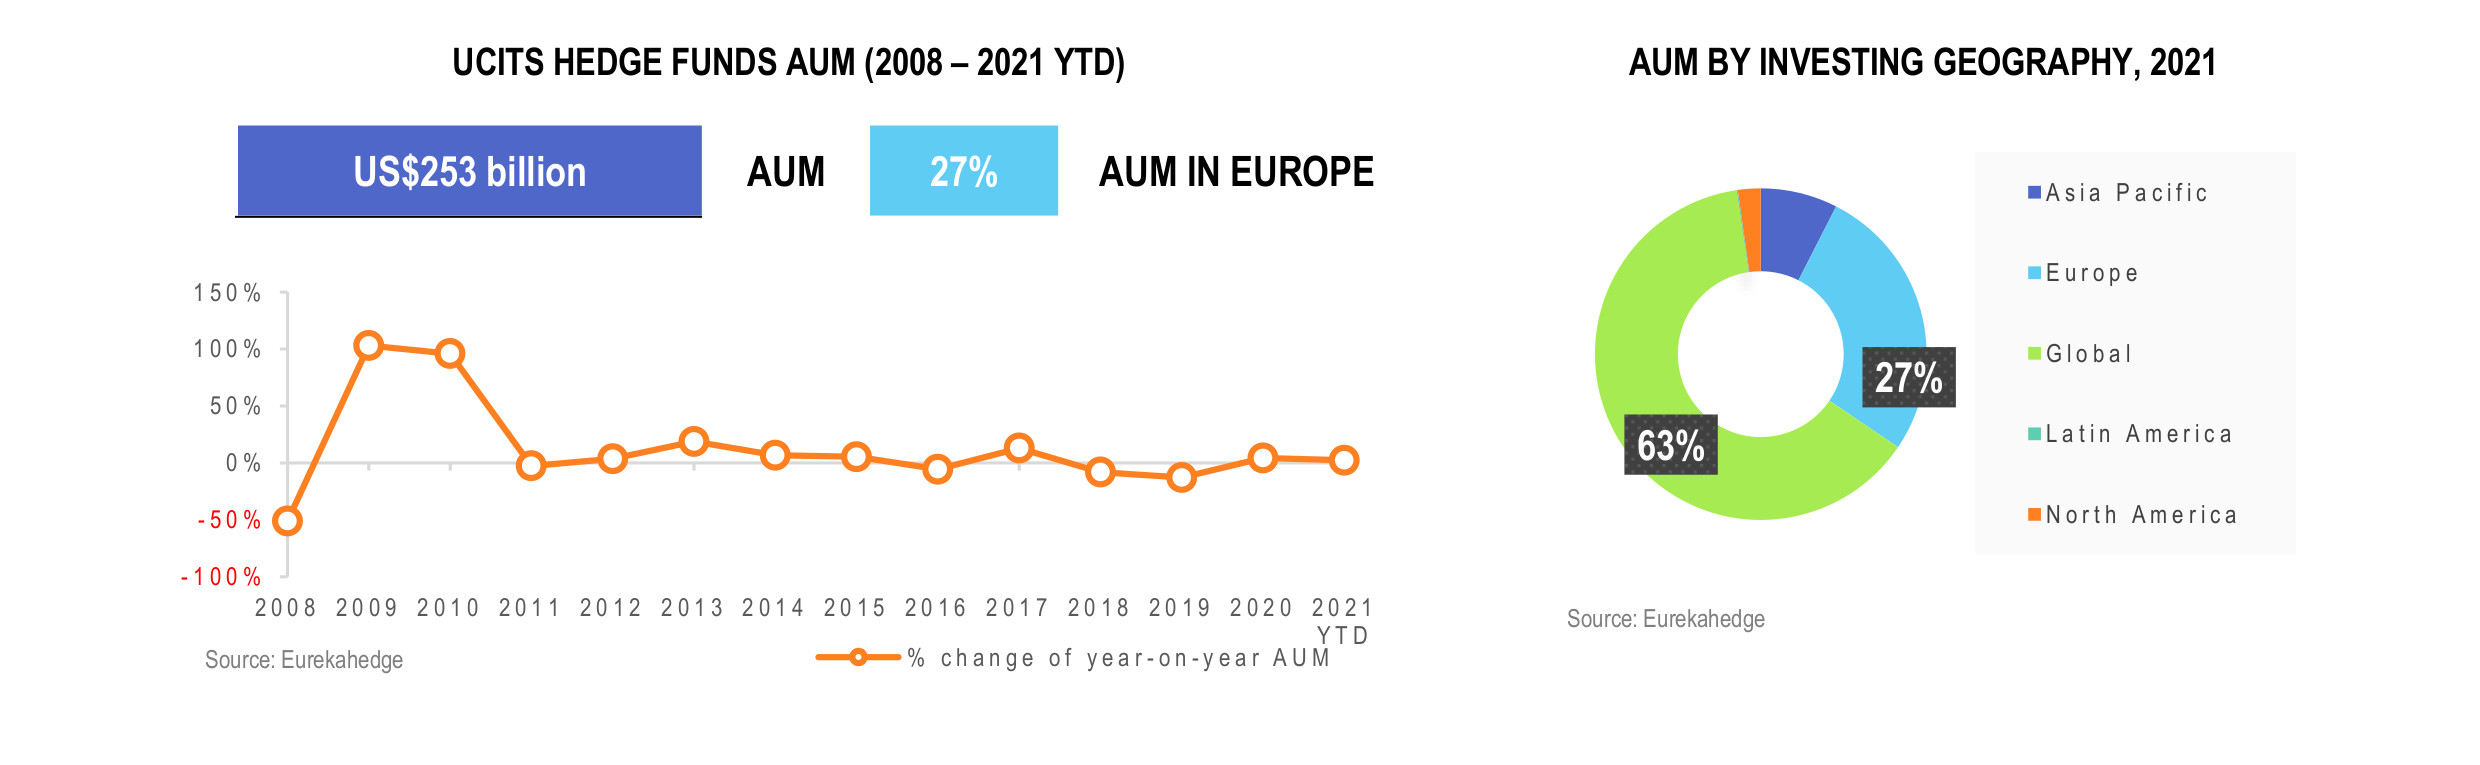 UCITS Hedge Funds Infographic June 2021 - AUM